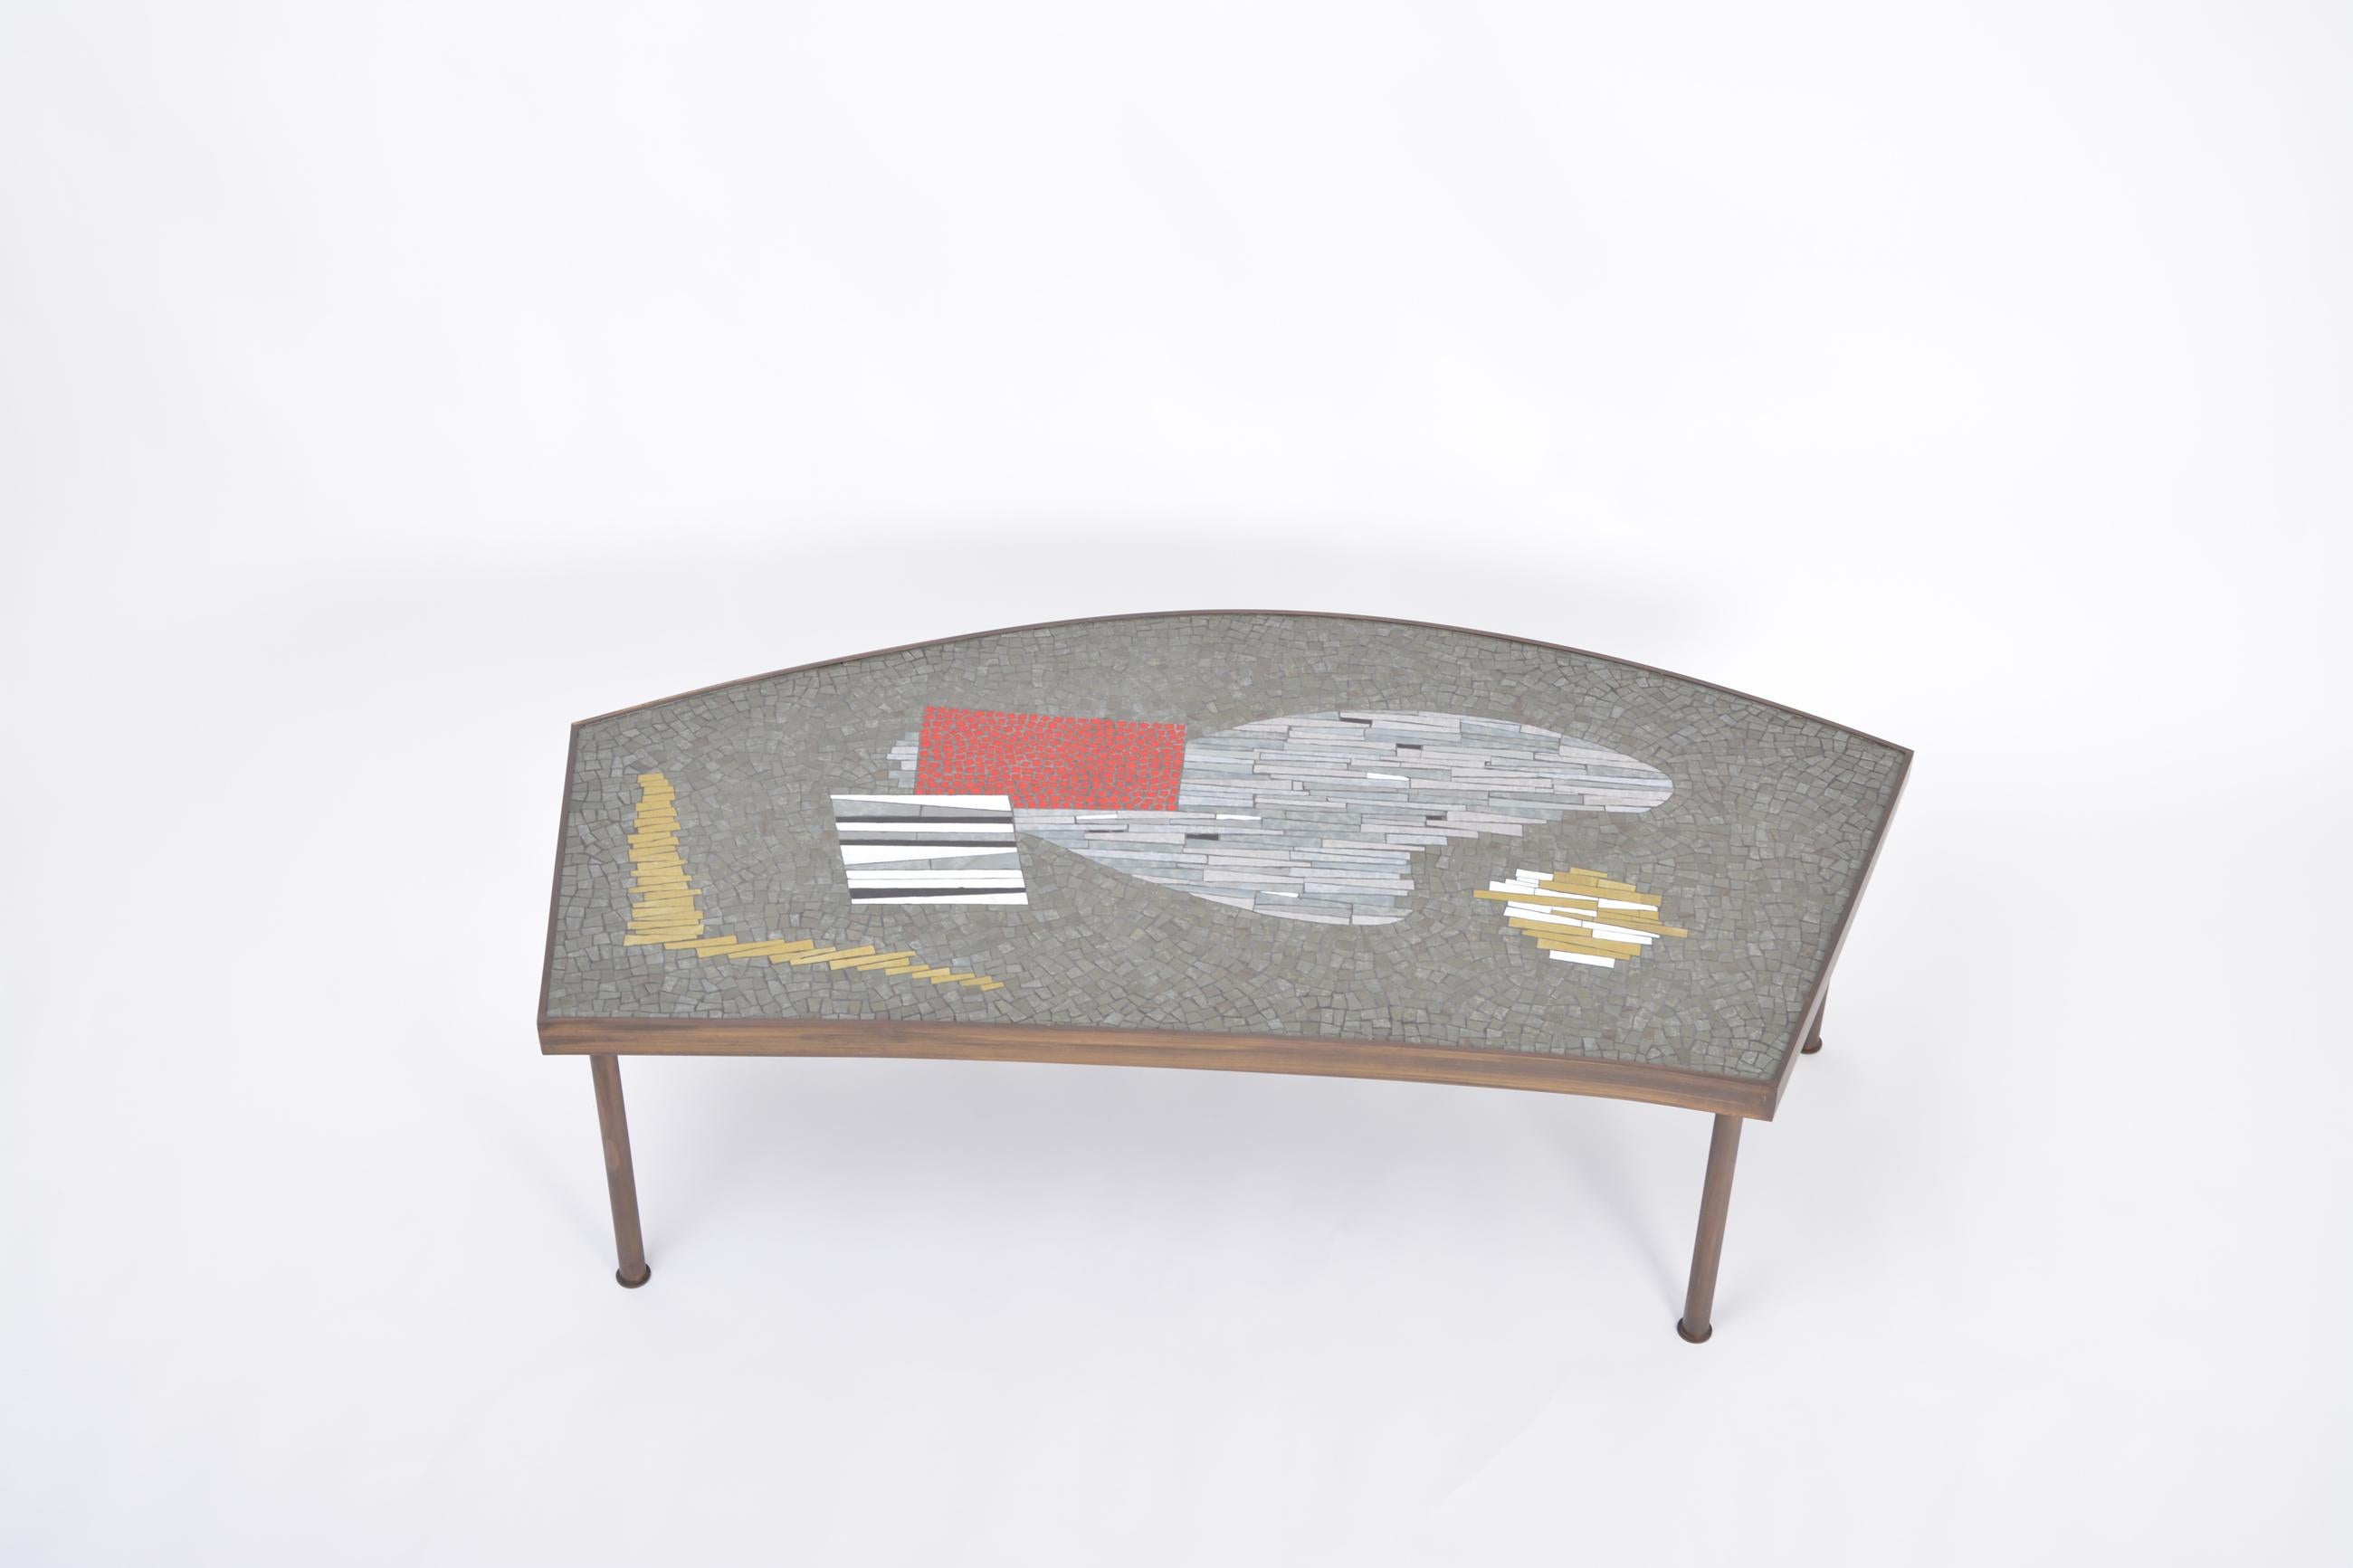 German Large Midcentury Mosaic and Brass Coffee Table by Berthold Müller-Oerlinghausen For Sale